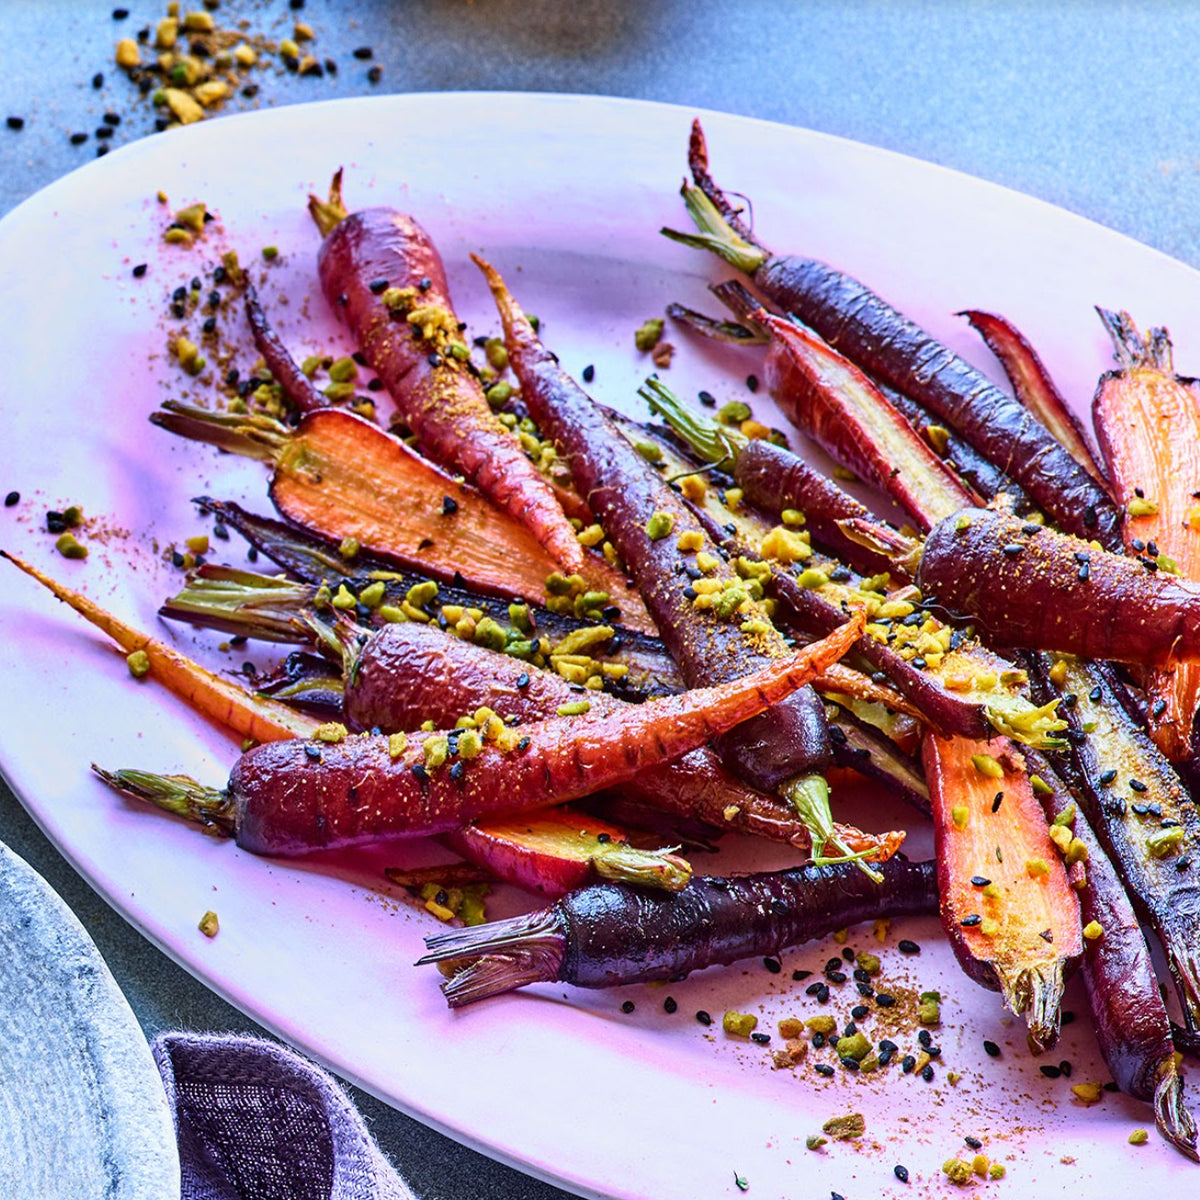 Purple and orange carrots with seasoning on large serving dish